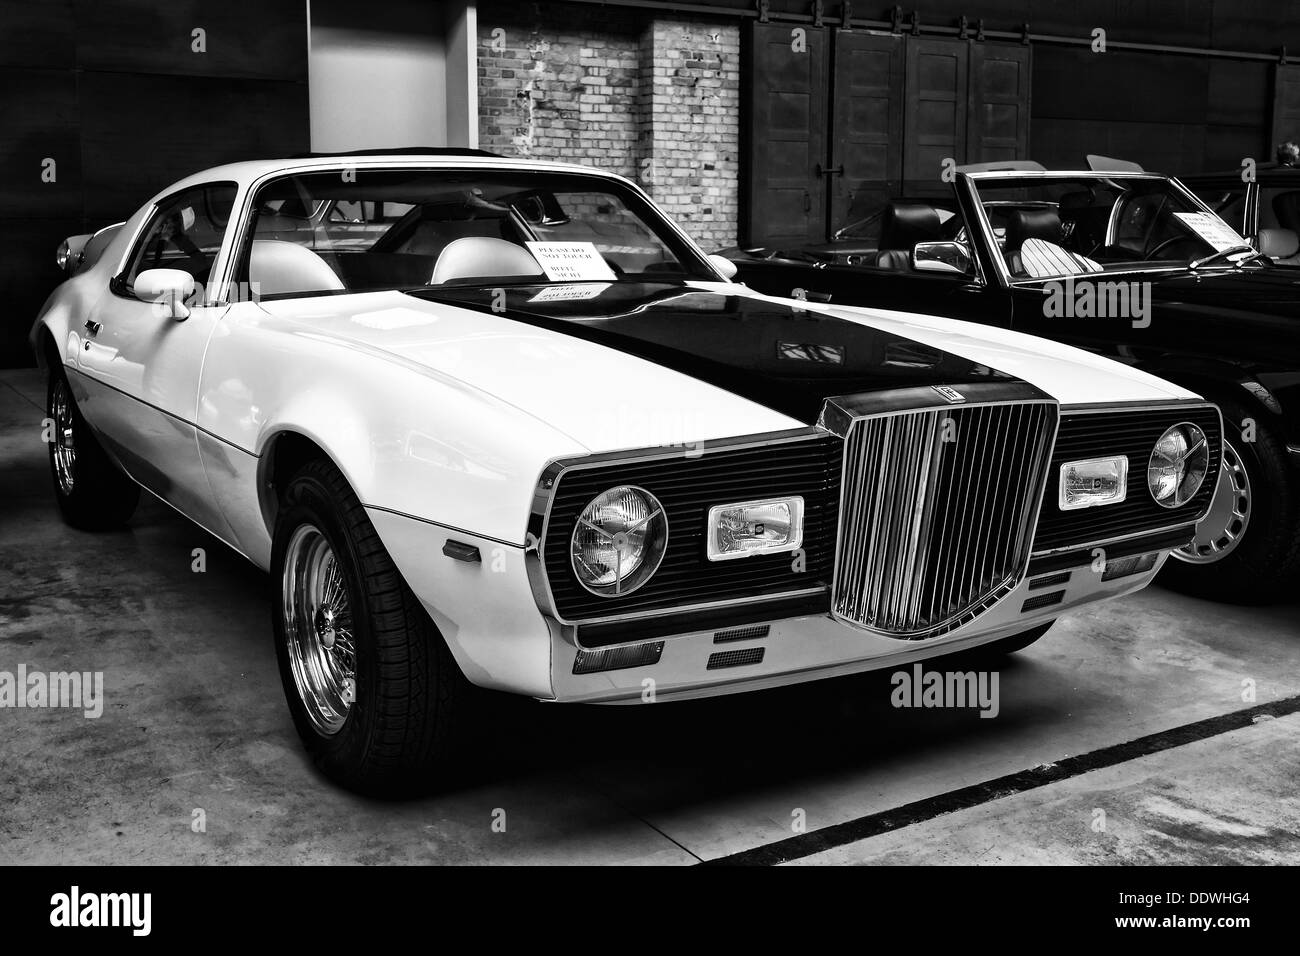 Swiss sports car Felber Excellence, based at the Pontiac Firebird Stock Photo